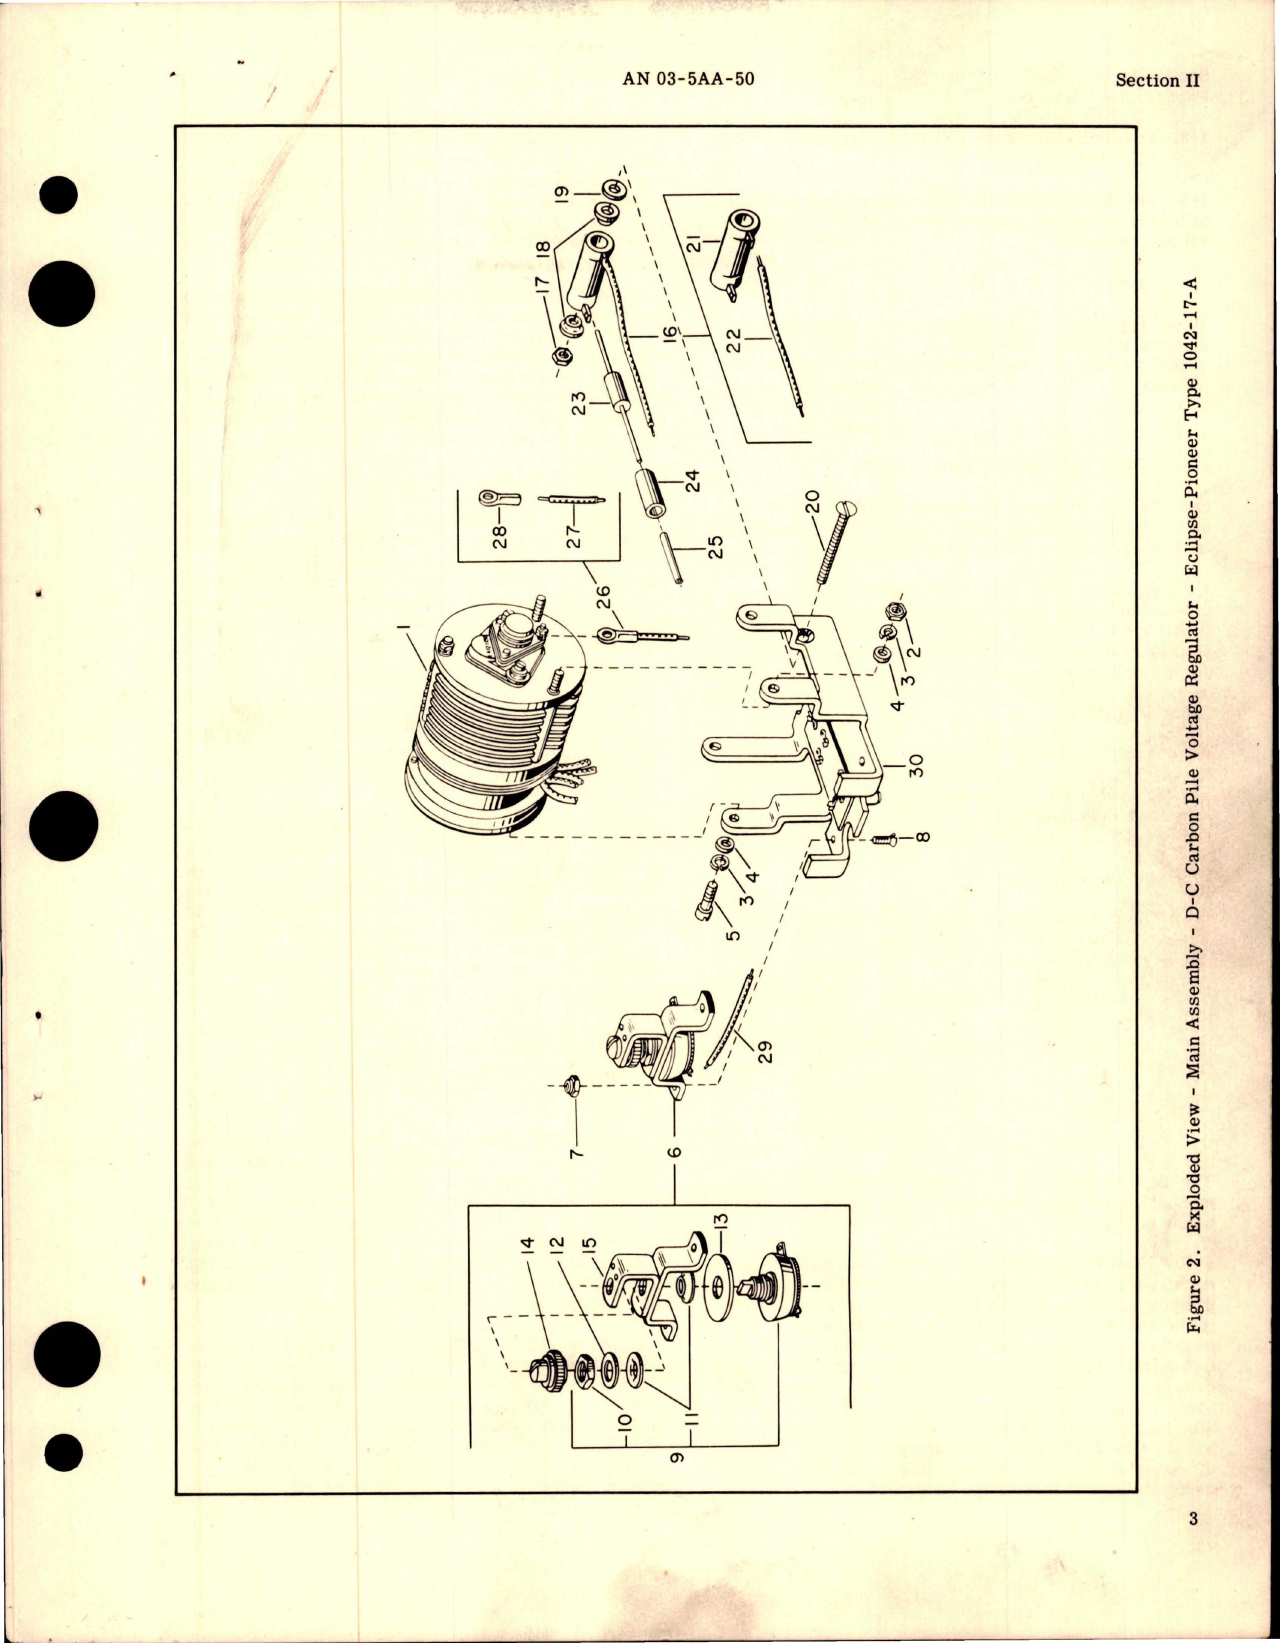 Sample page 5 from AirCorps Library document: Parts Catalog for D-C Carbon Pile Voltage Regulator - Part 1042-17-A 